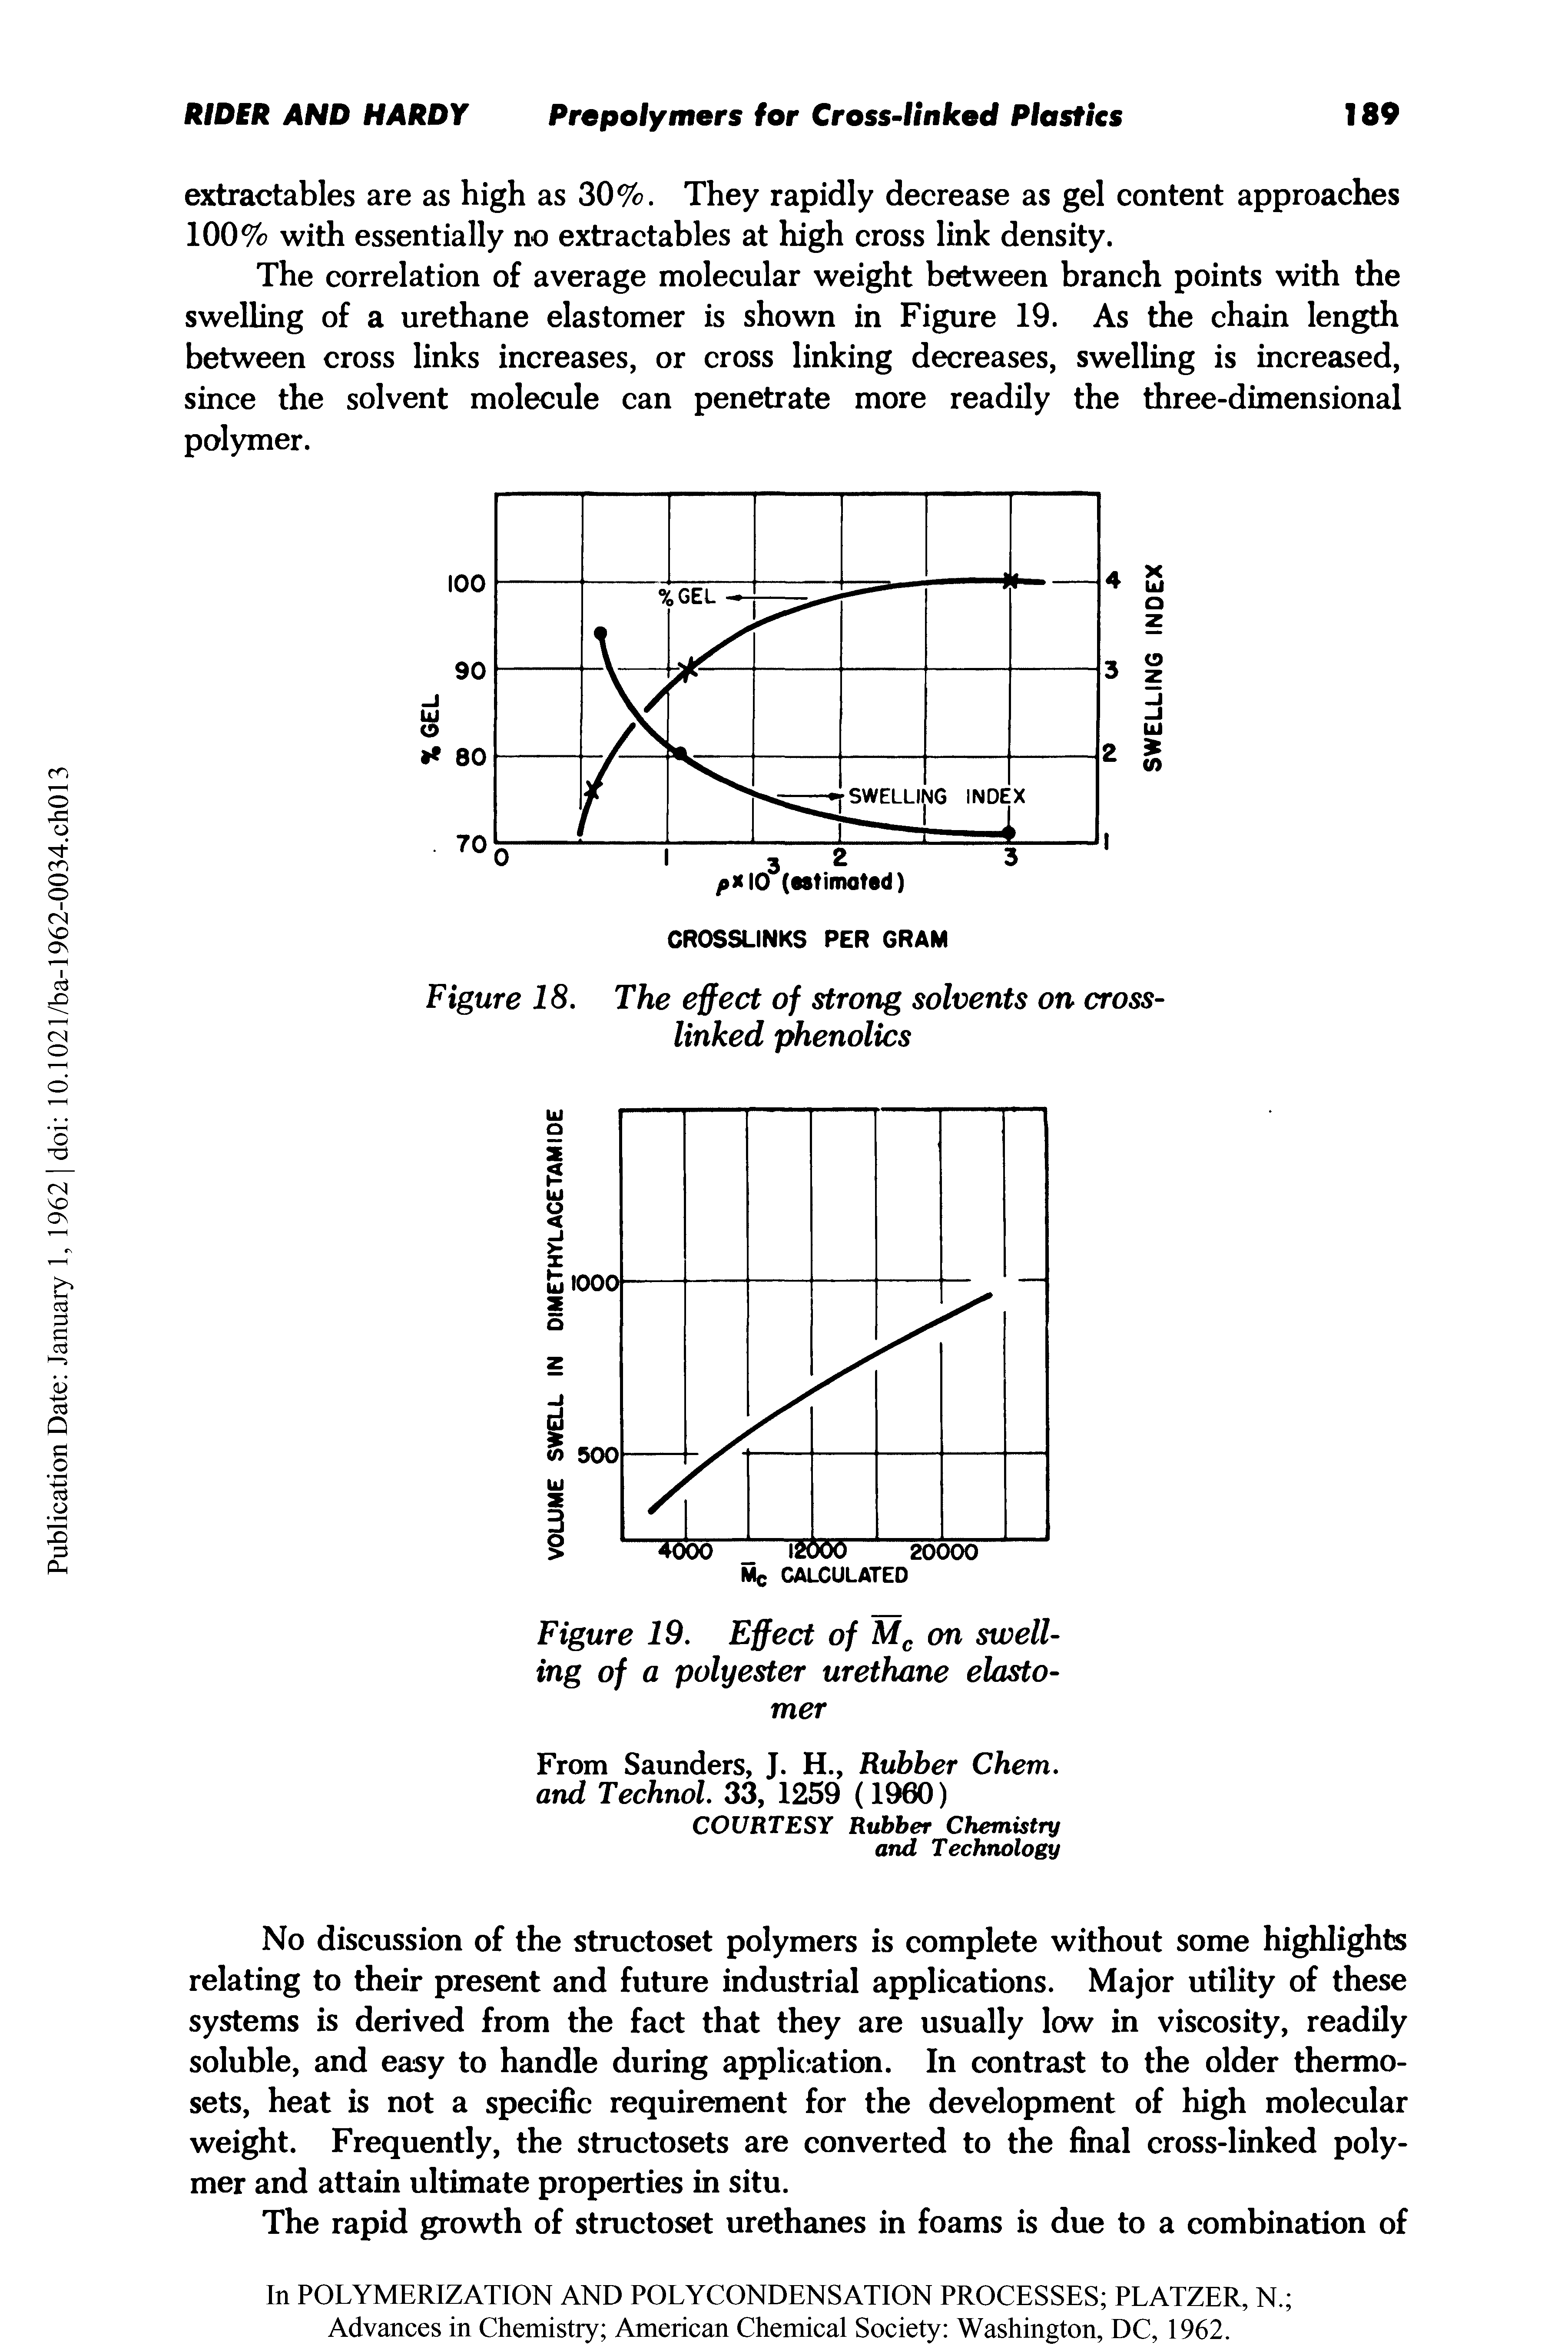 Figure 18. The effect of strong solvents on cross-linked phenolics...